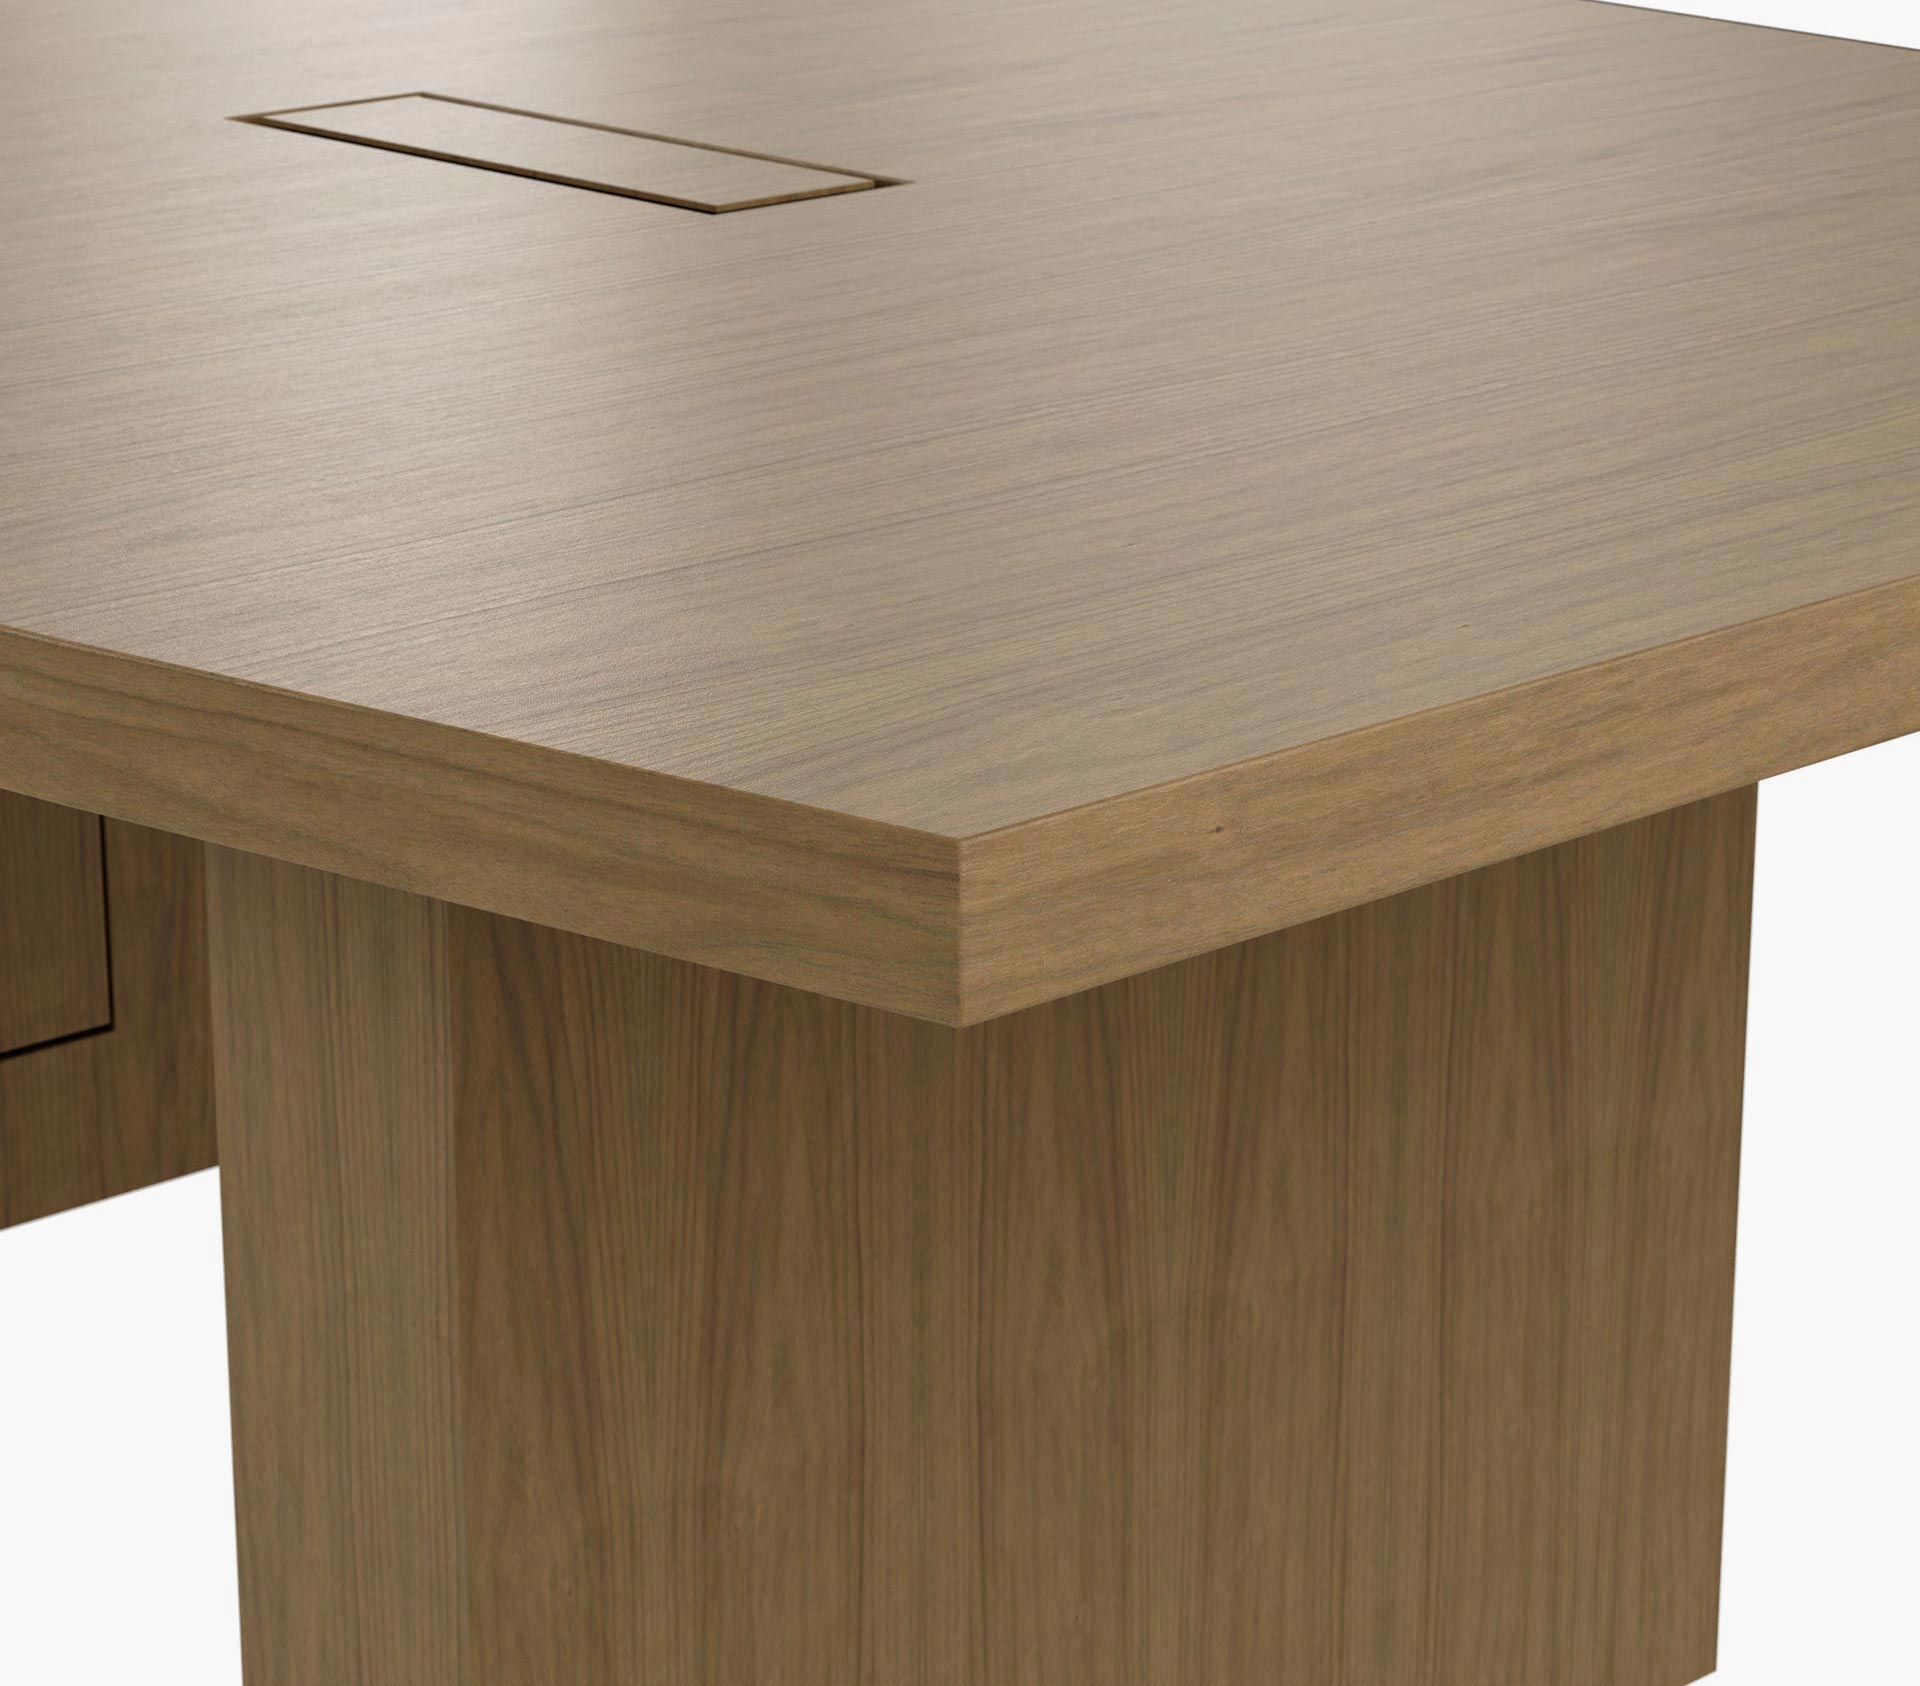 Edge detail on a boat-shaped JD Conference Table in natural flat cut walnut